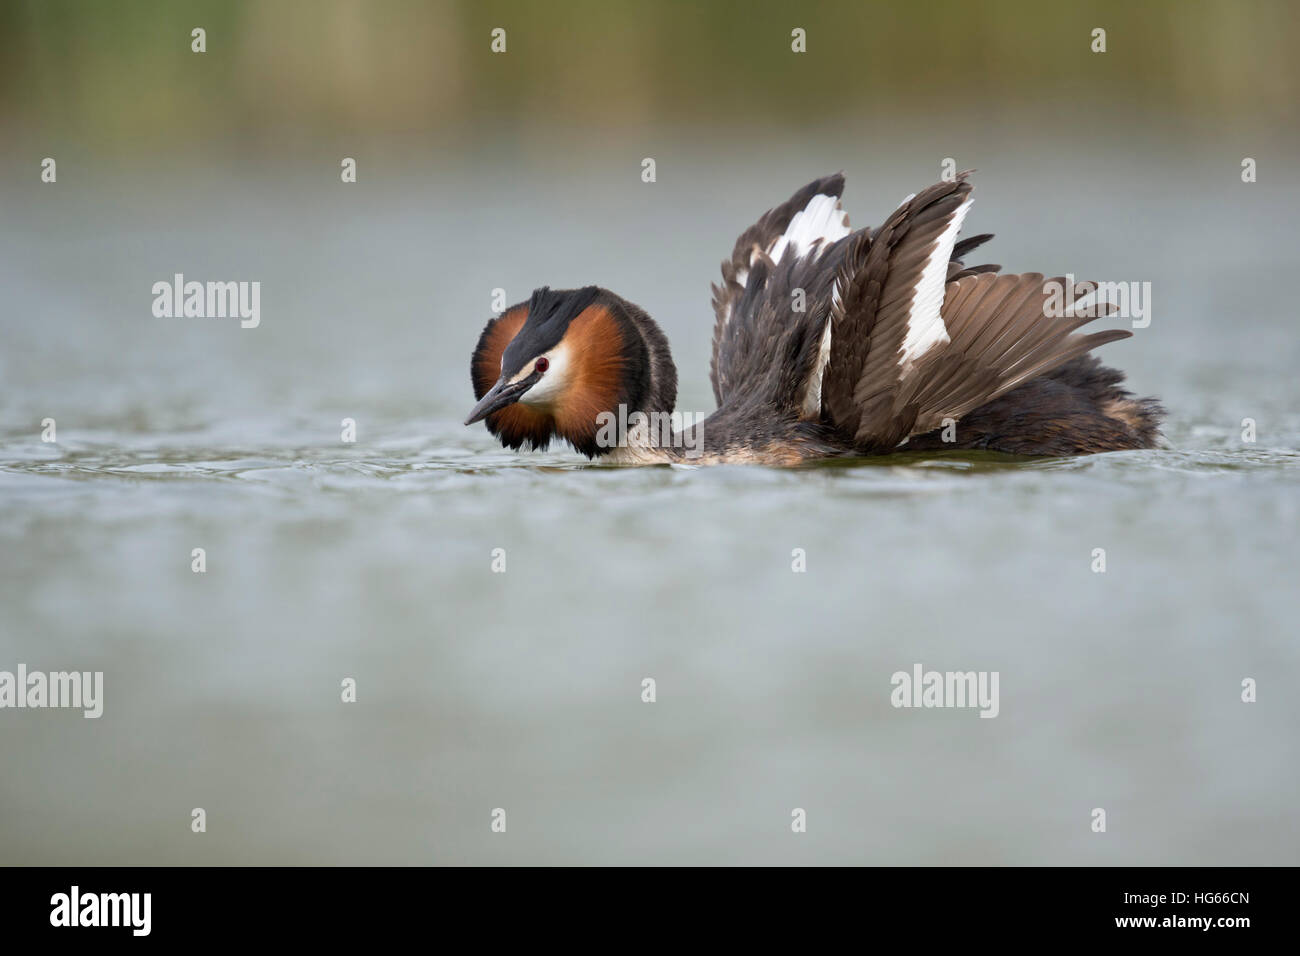 Great Crested Grebe ( Podiceps cristatus ) courting, opening its wings to impress its mate, showing courtship display. Stock Photo